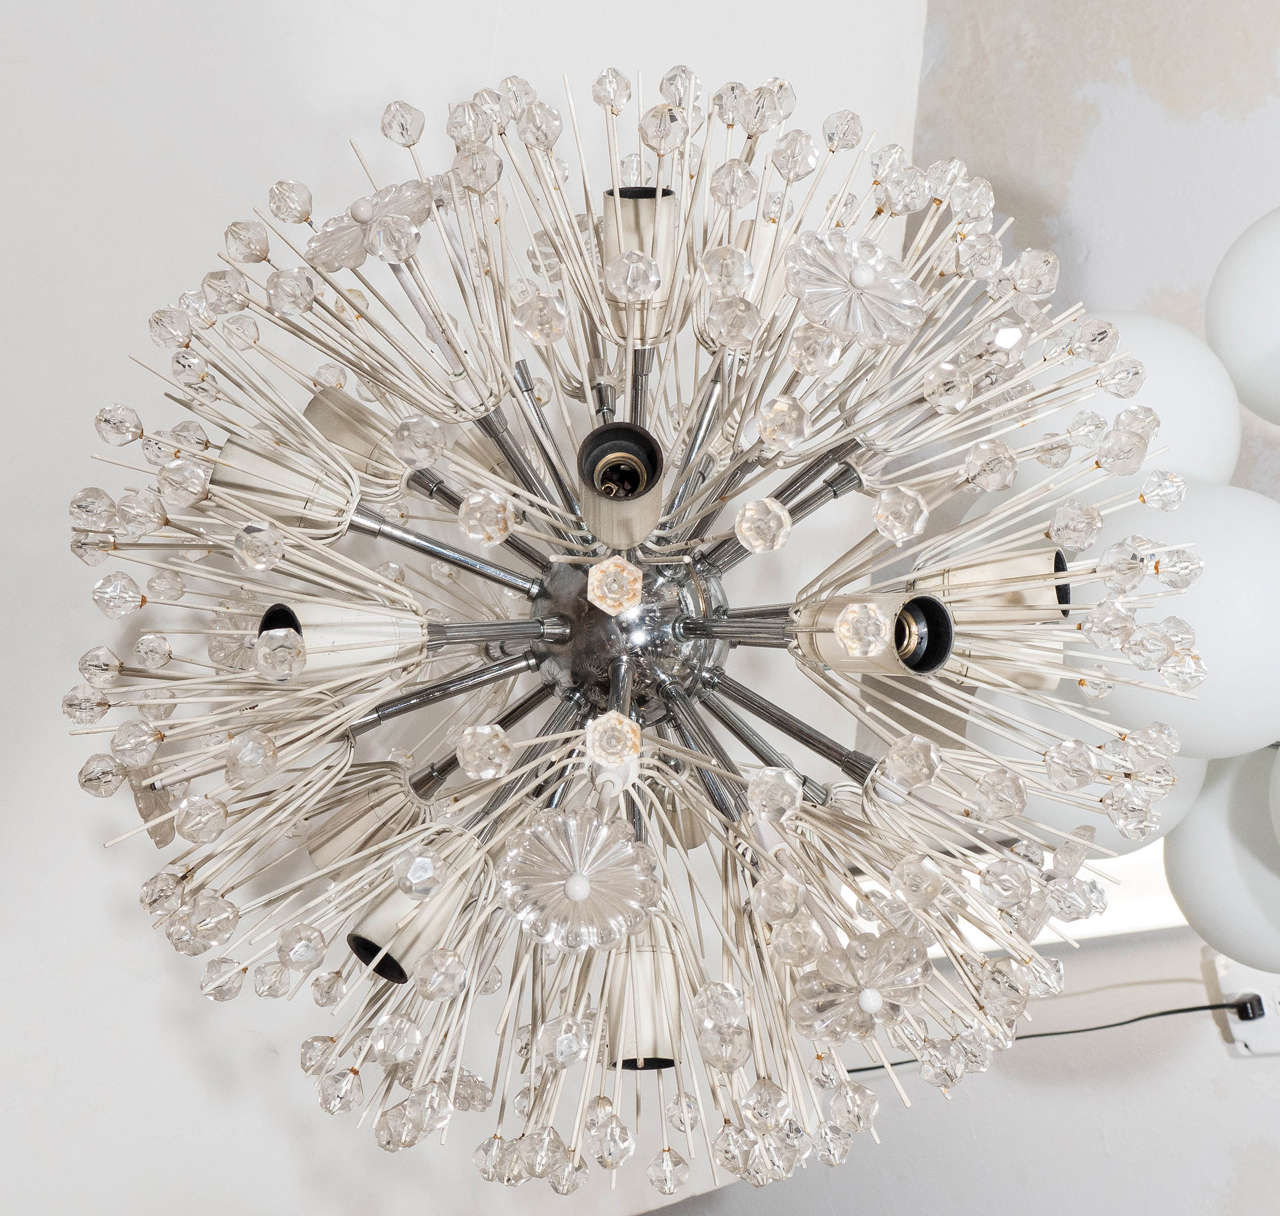 A vintage sputnik chandelier, produced mid-century by Austrian designer Emil Stejnar, with chrome frame and central nucleus, and white enamel sockets and spokes, decorated with acrylic florets and faceted beads. Requires candelabra base bulbs. Very